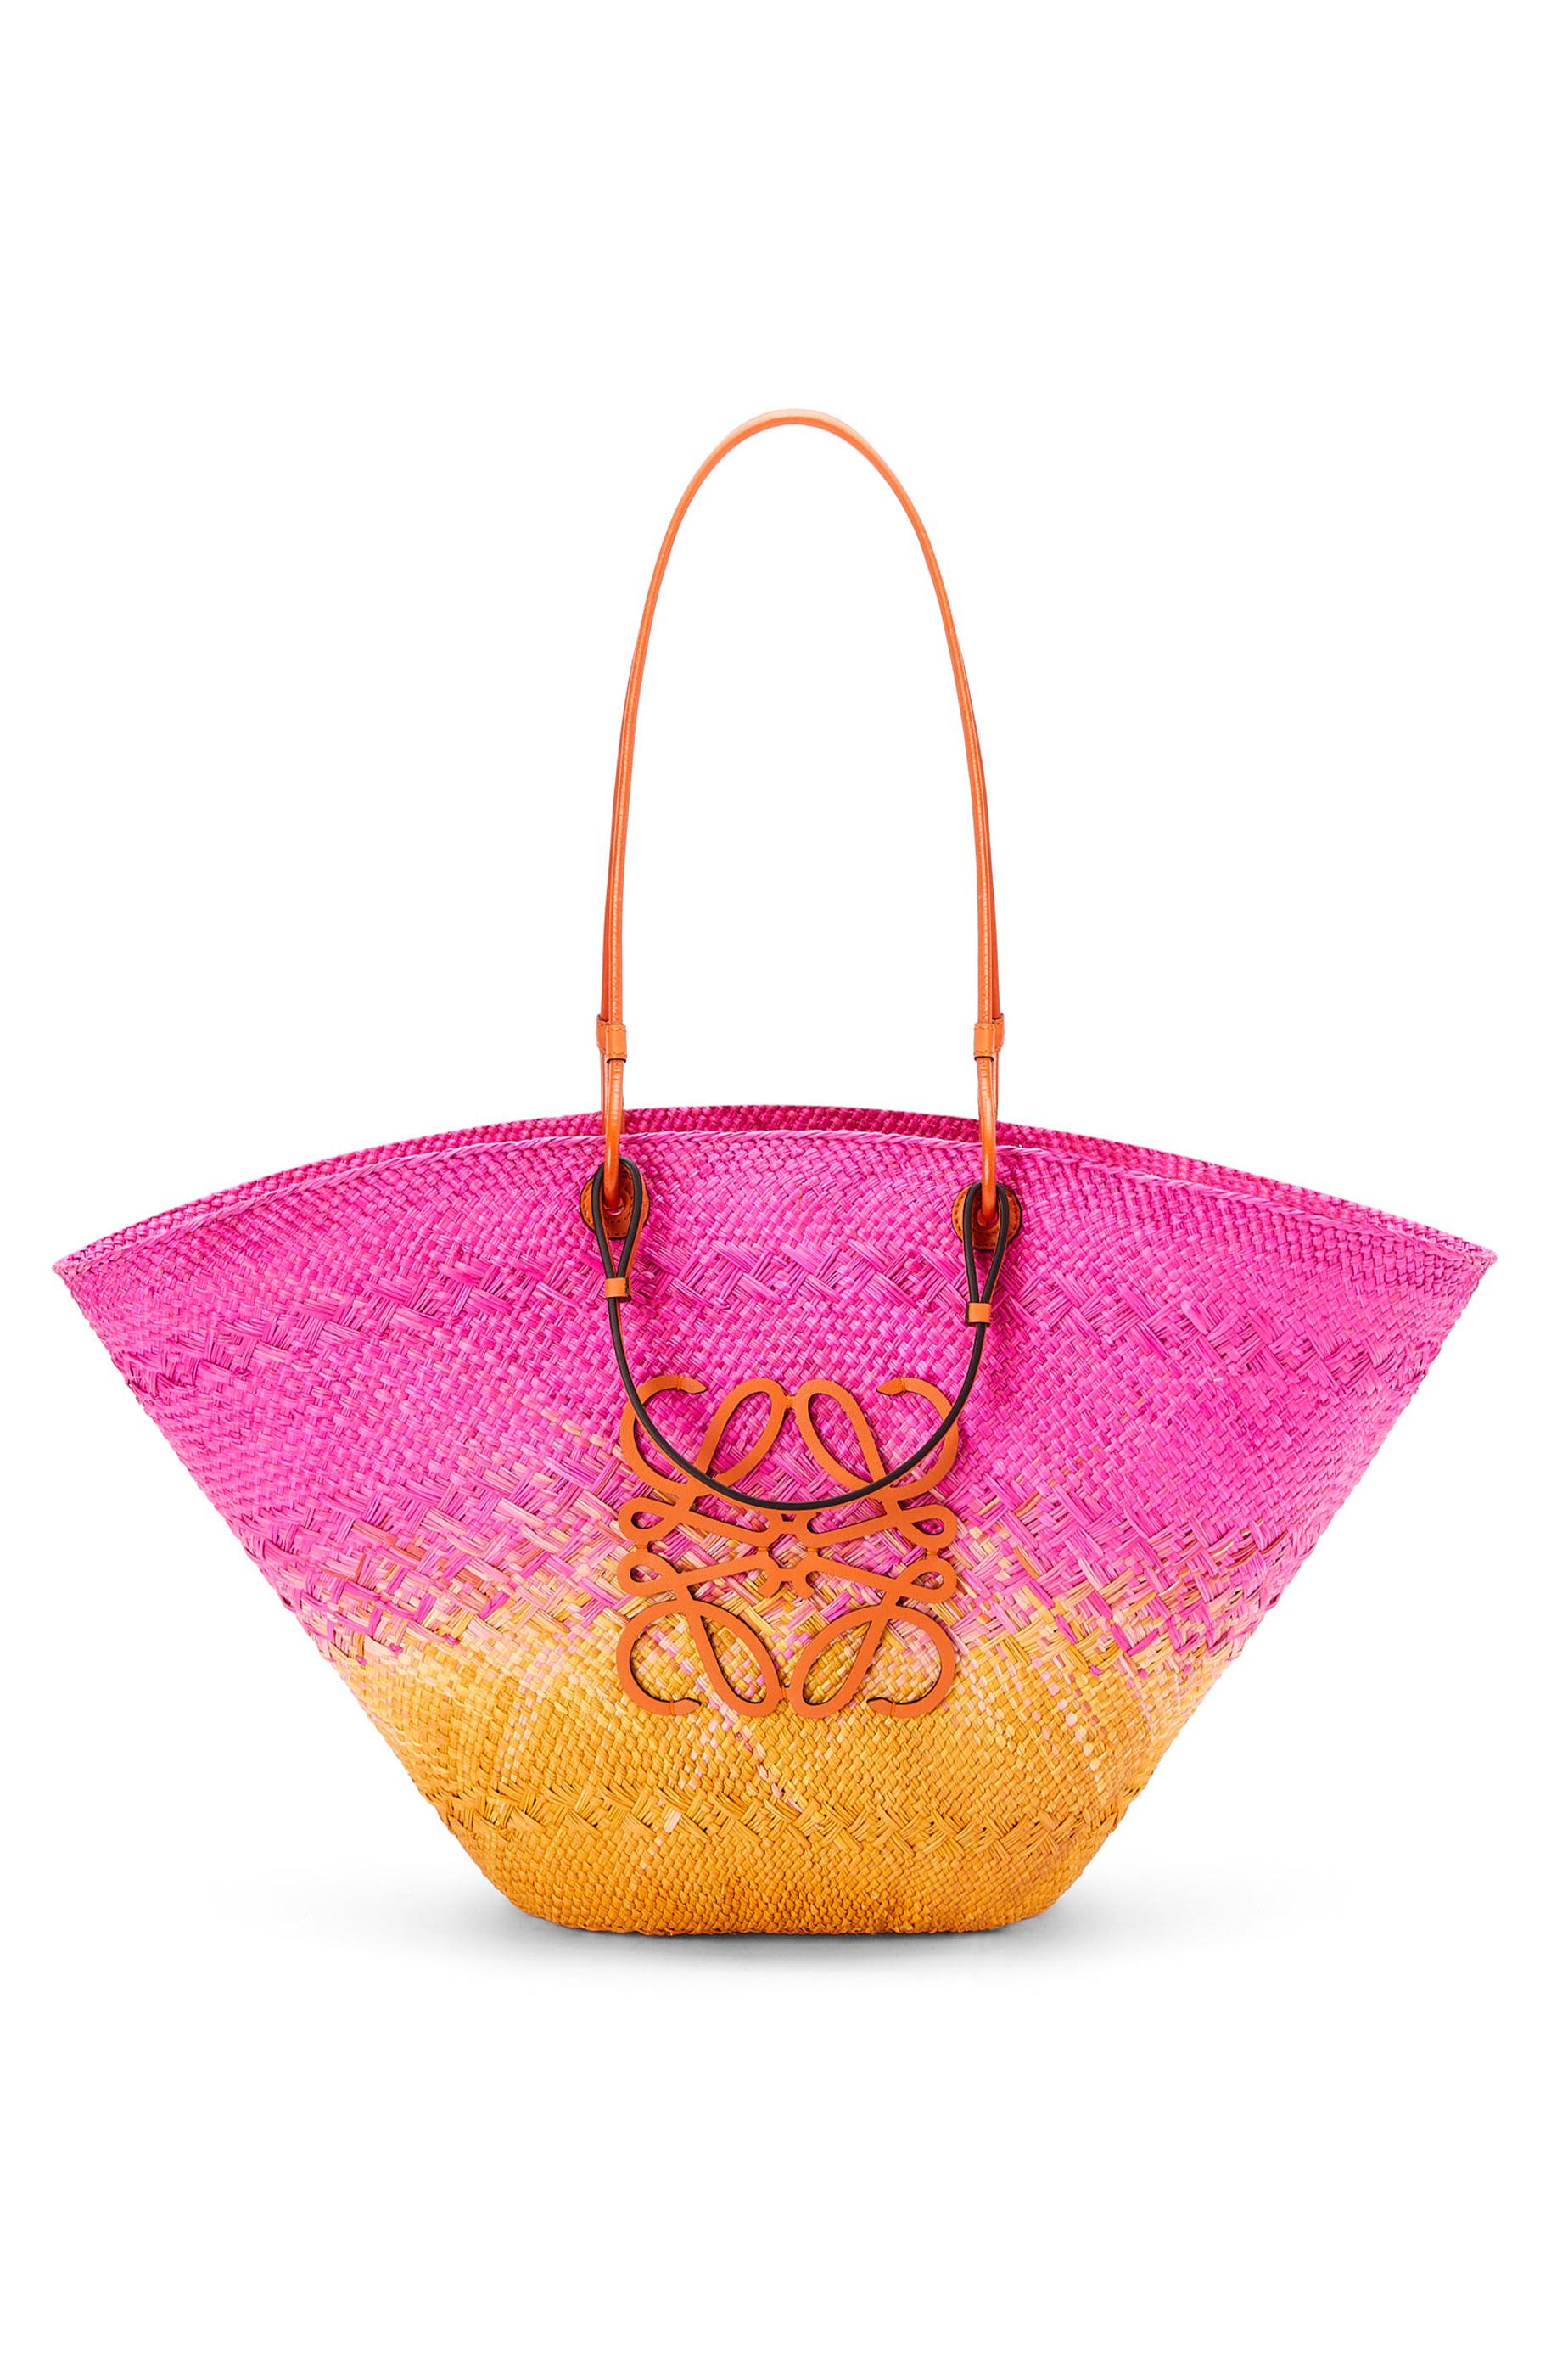 Loewe Luxury Large Anagram Basket Bag In Iraca Palm And Calfskin For Women  in Pink | Lyst